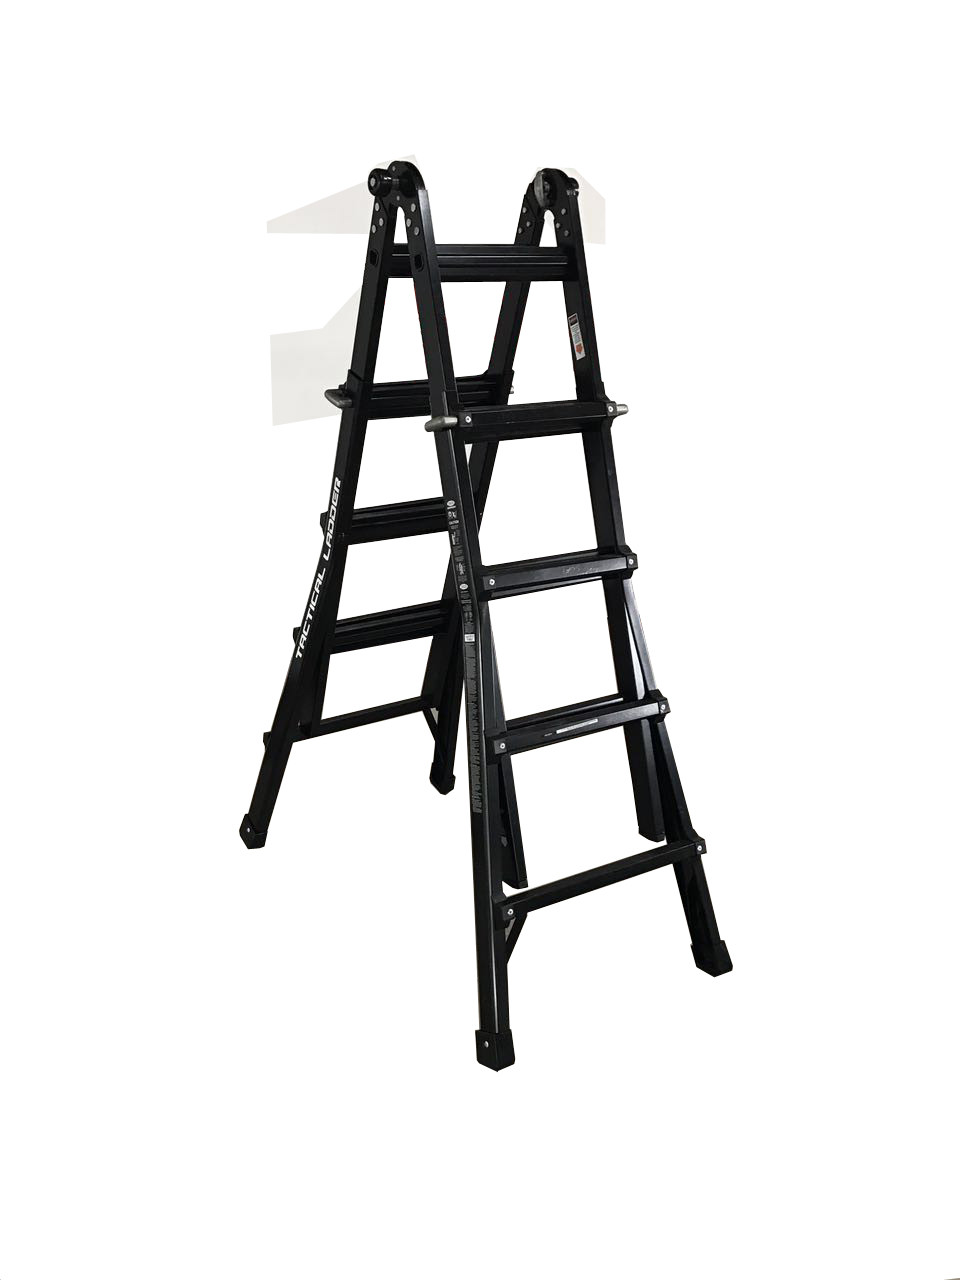 Best Aluminum / Stainless Steel Composite Tactical Folding Ladder Step Ladders wholesale